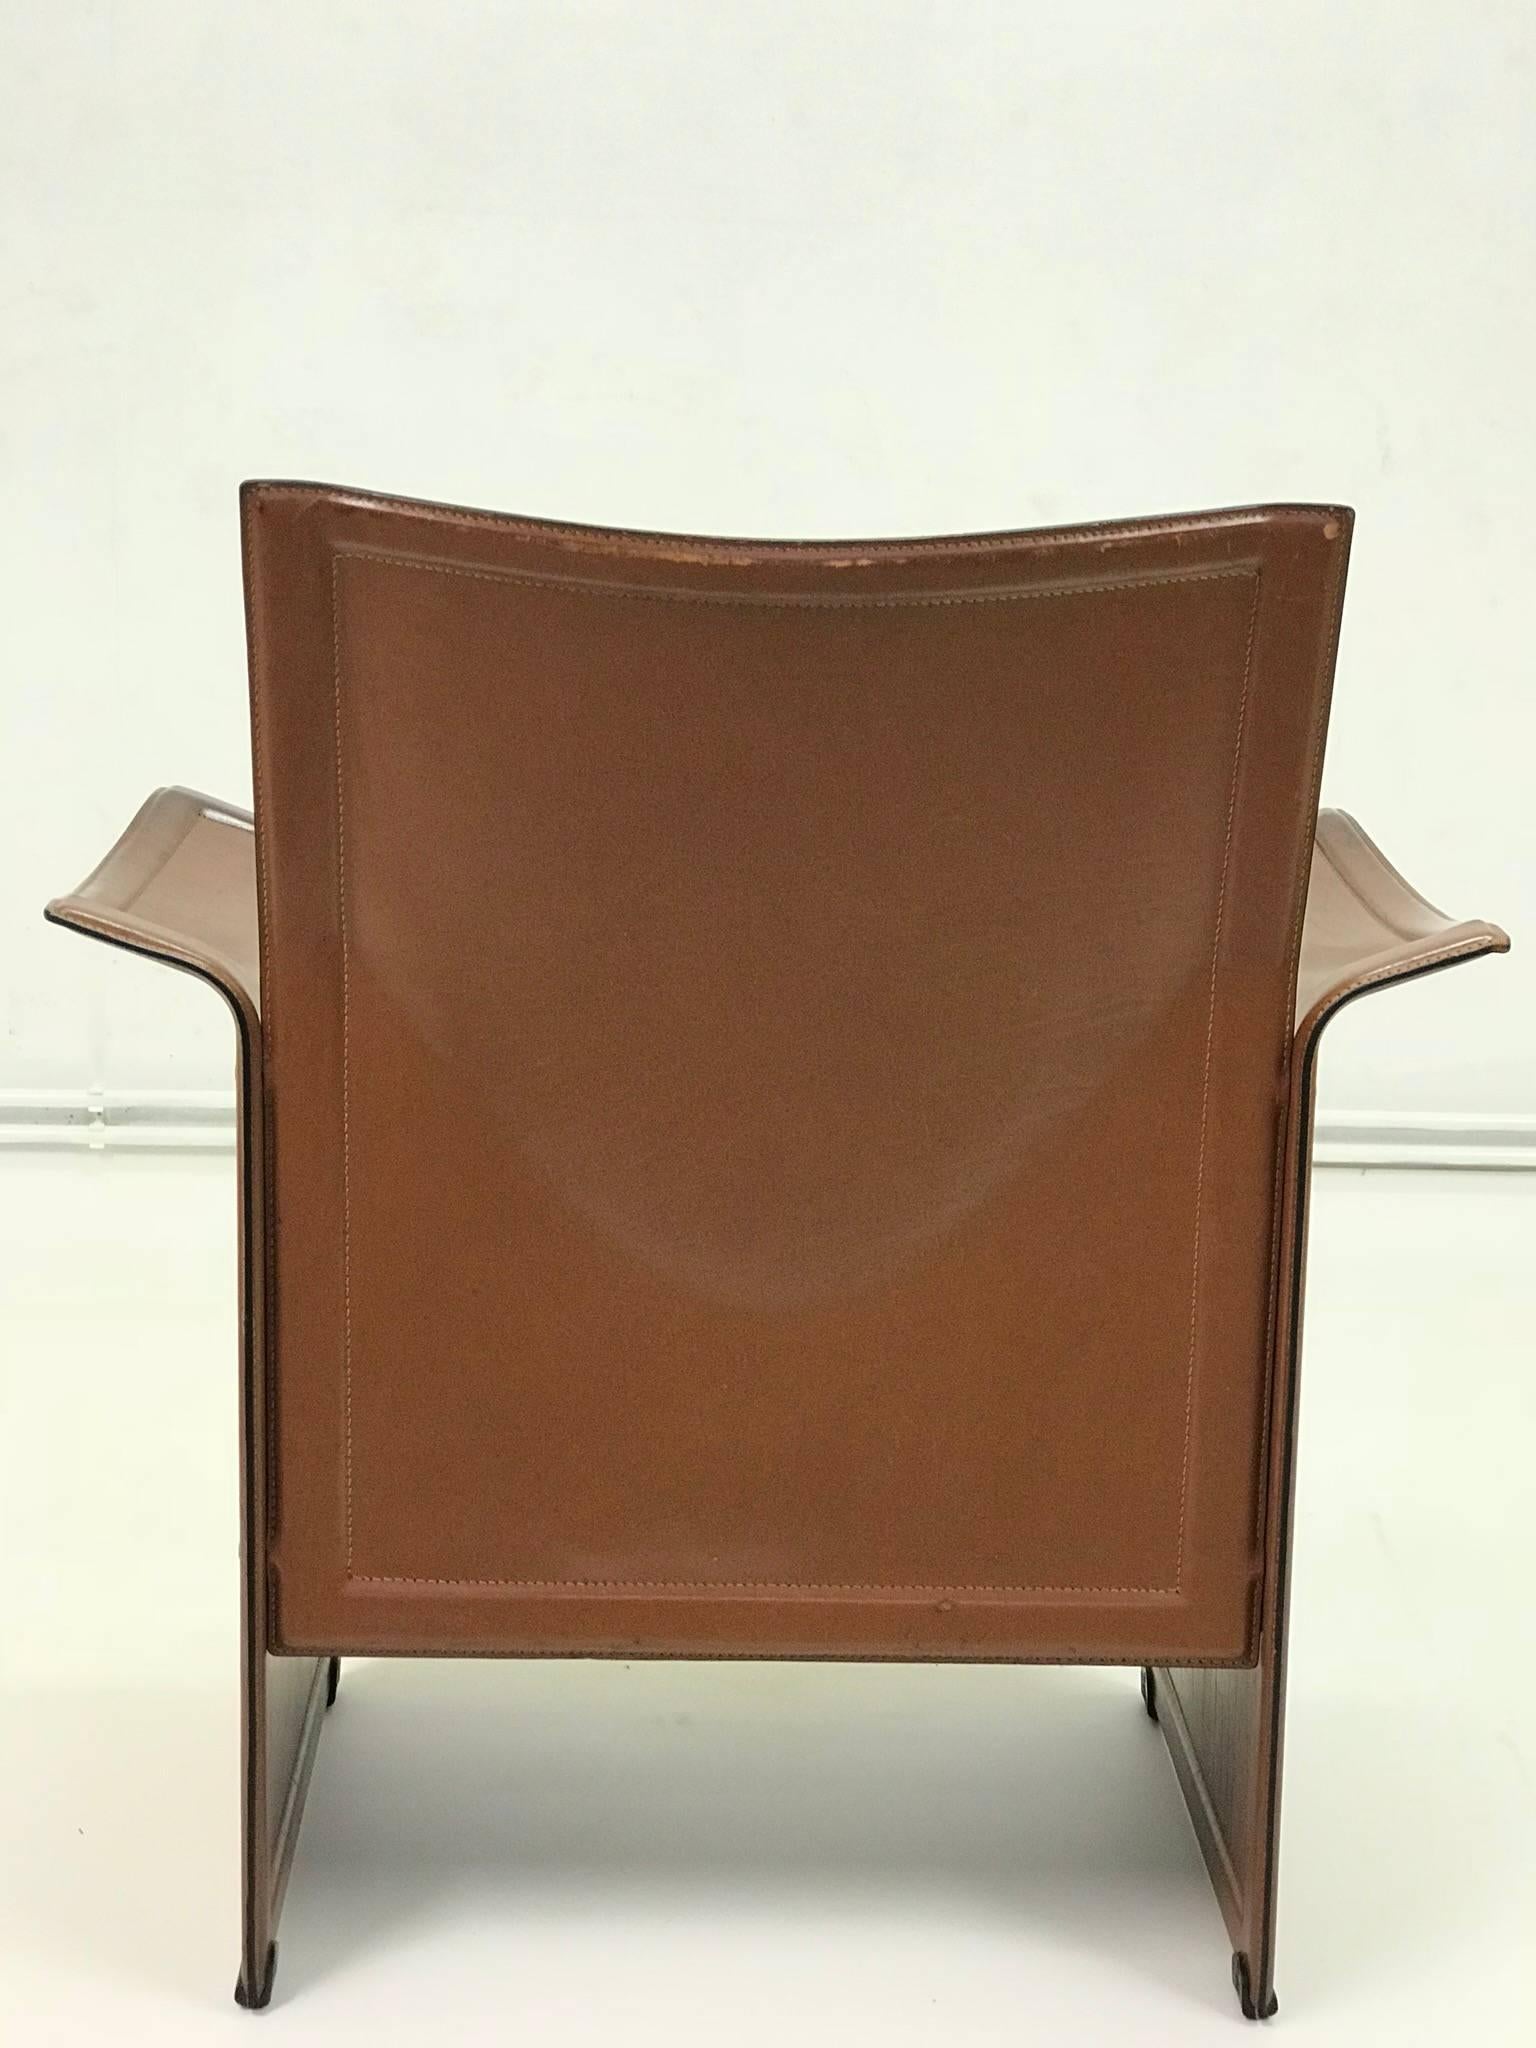 The leather charming armchair is made by Italian manufacture. It is characterized by ungular design. The color is dark brown. Sitting on the armchair is very comfortable.